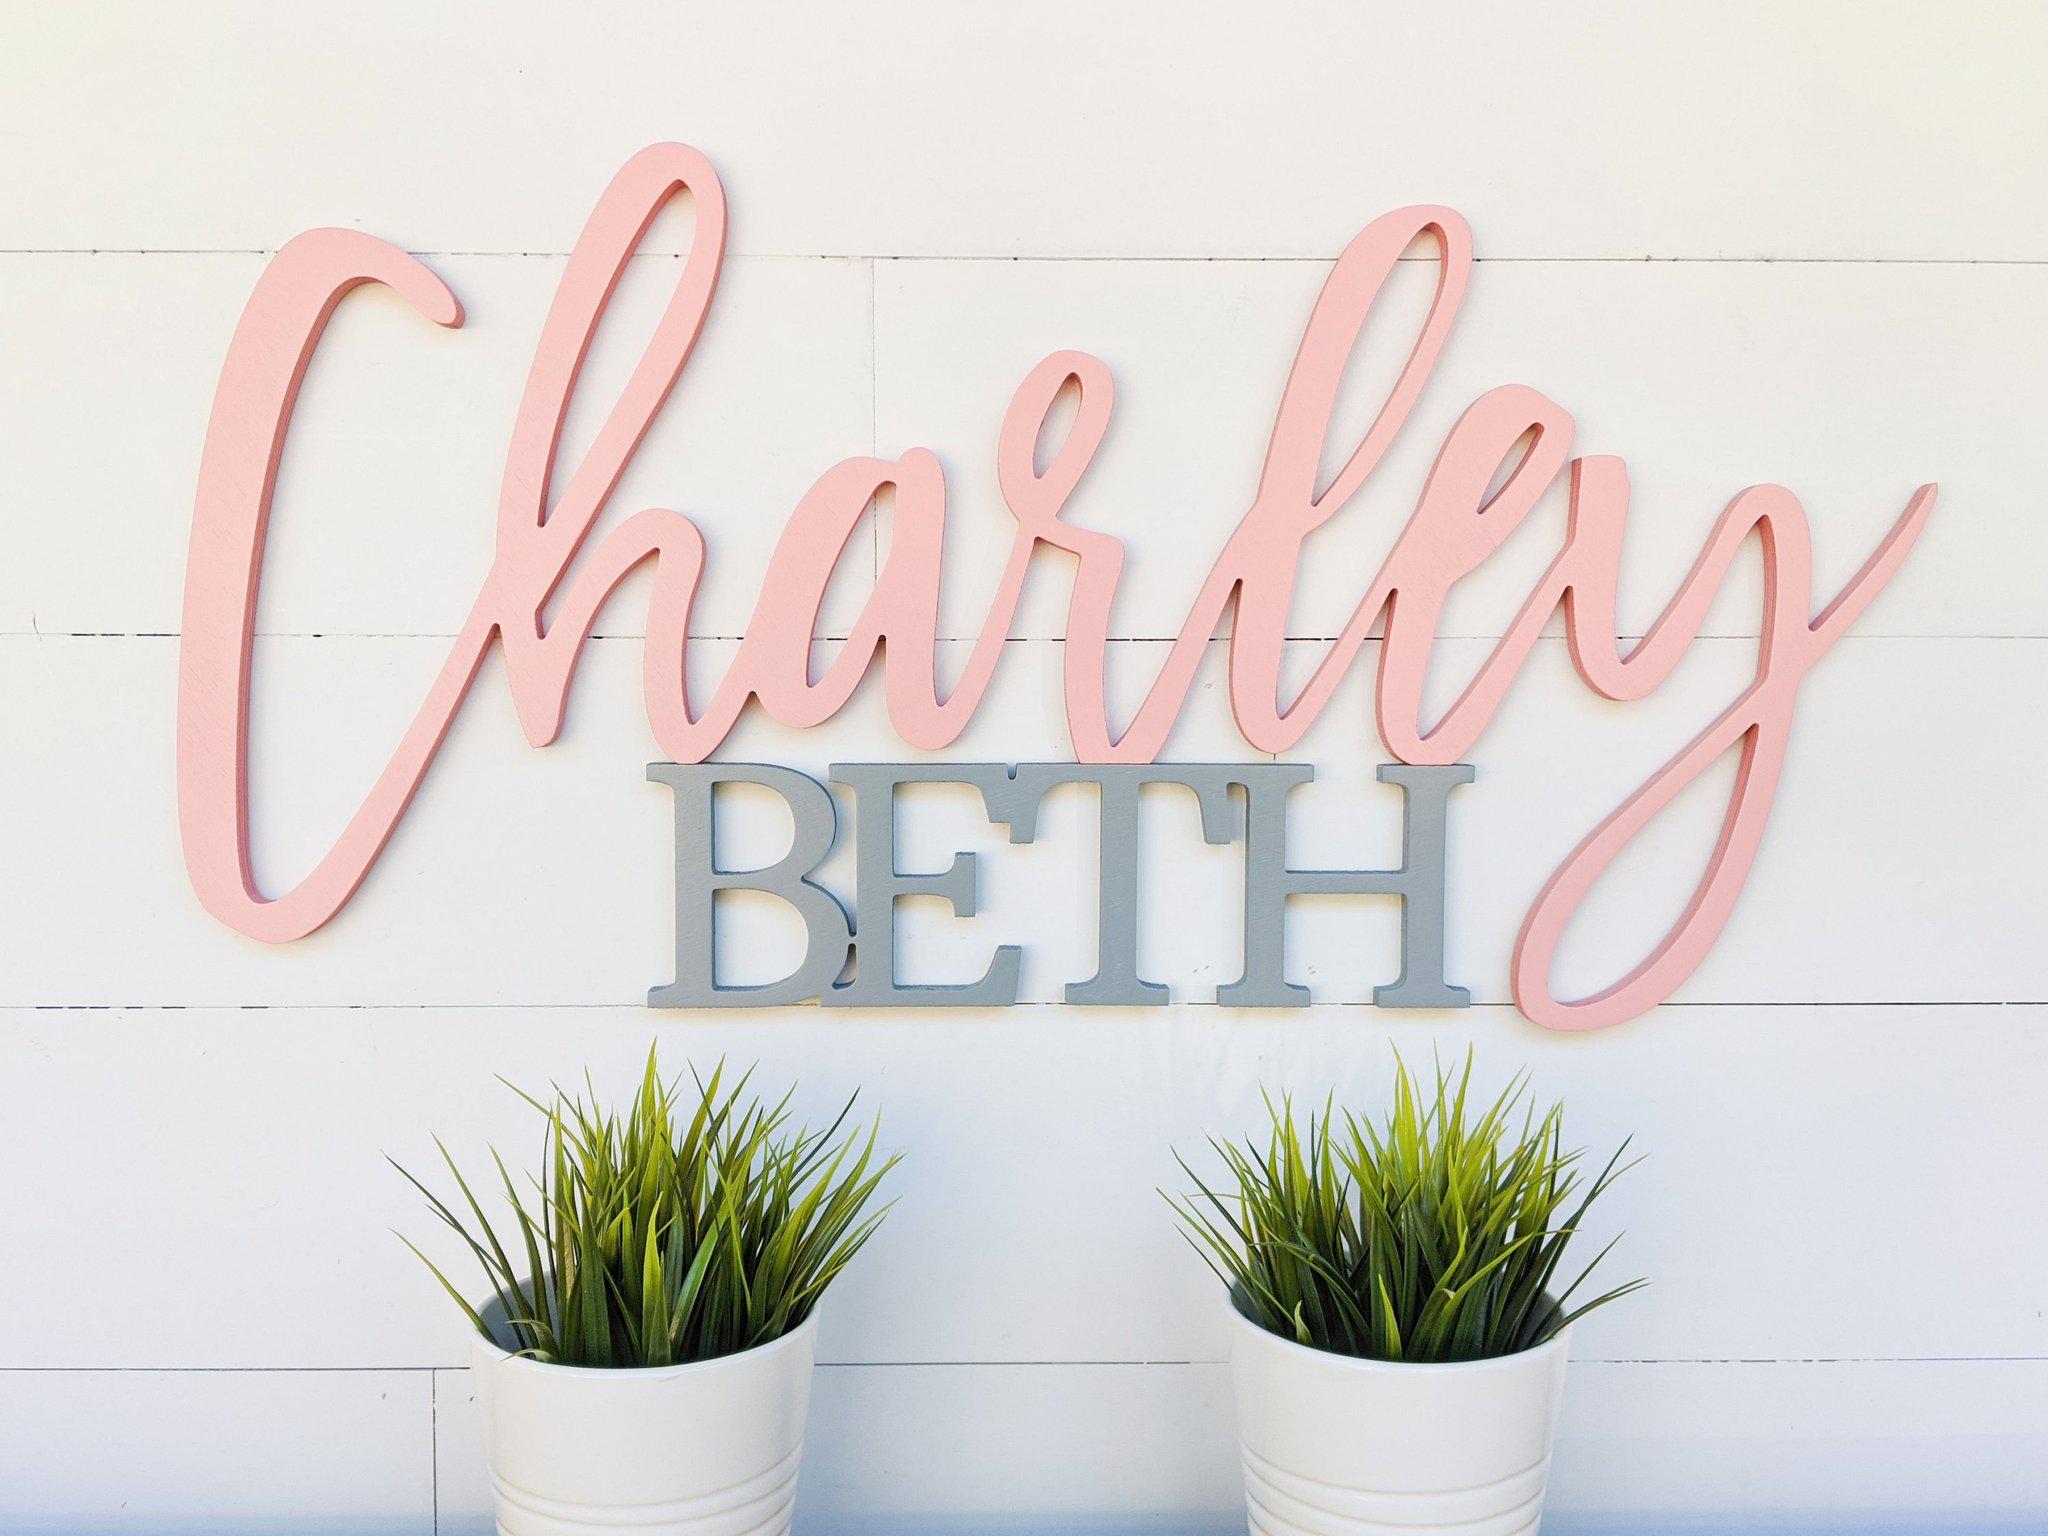 Name Sign - Charley Beth Style